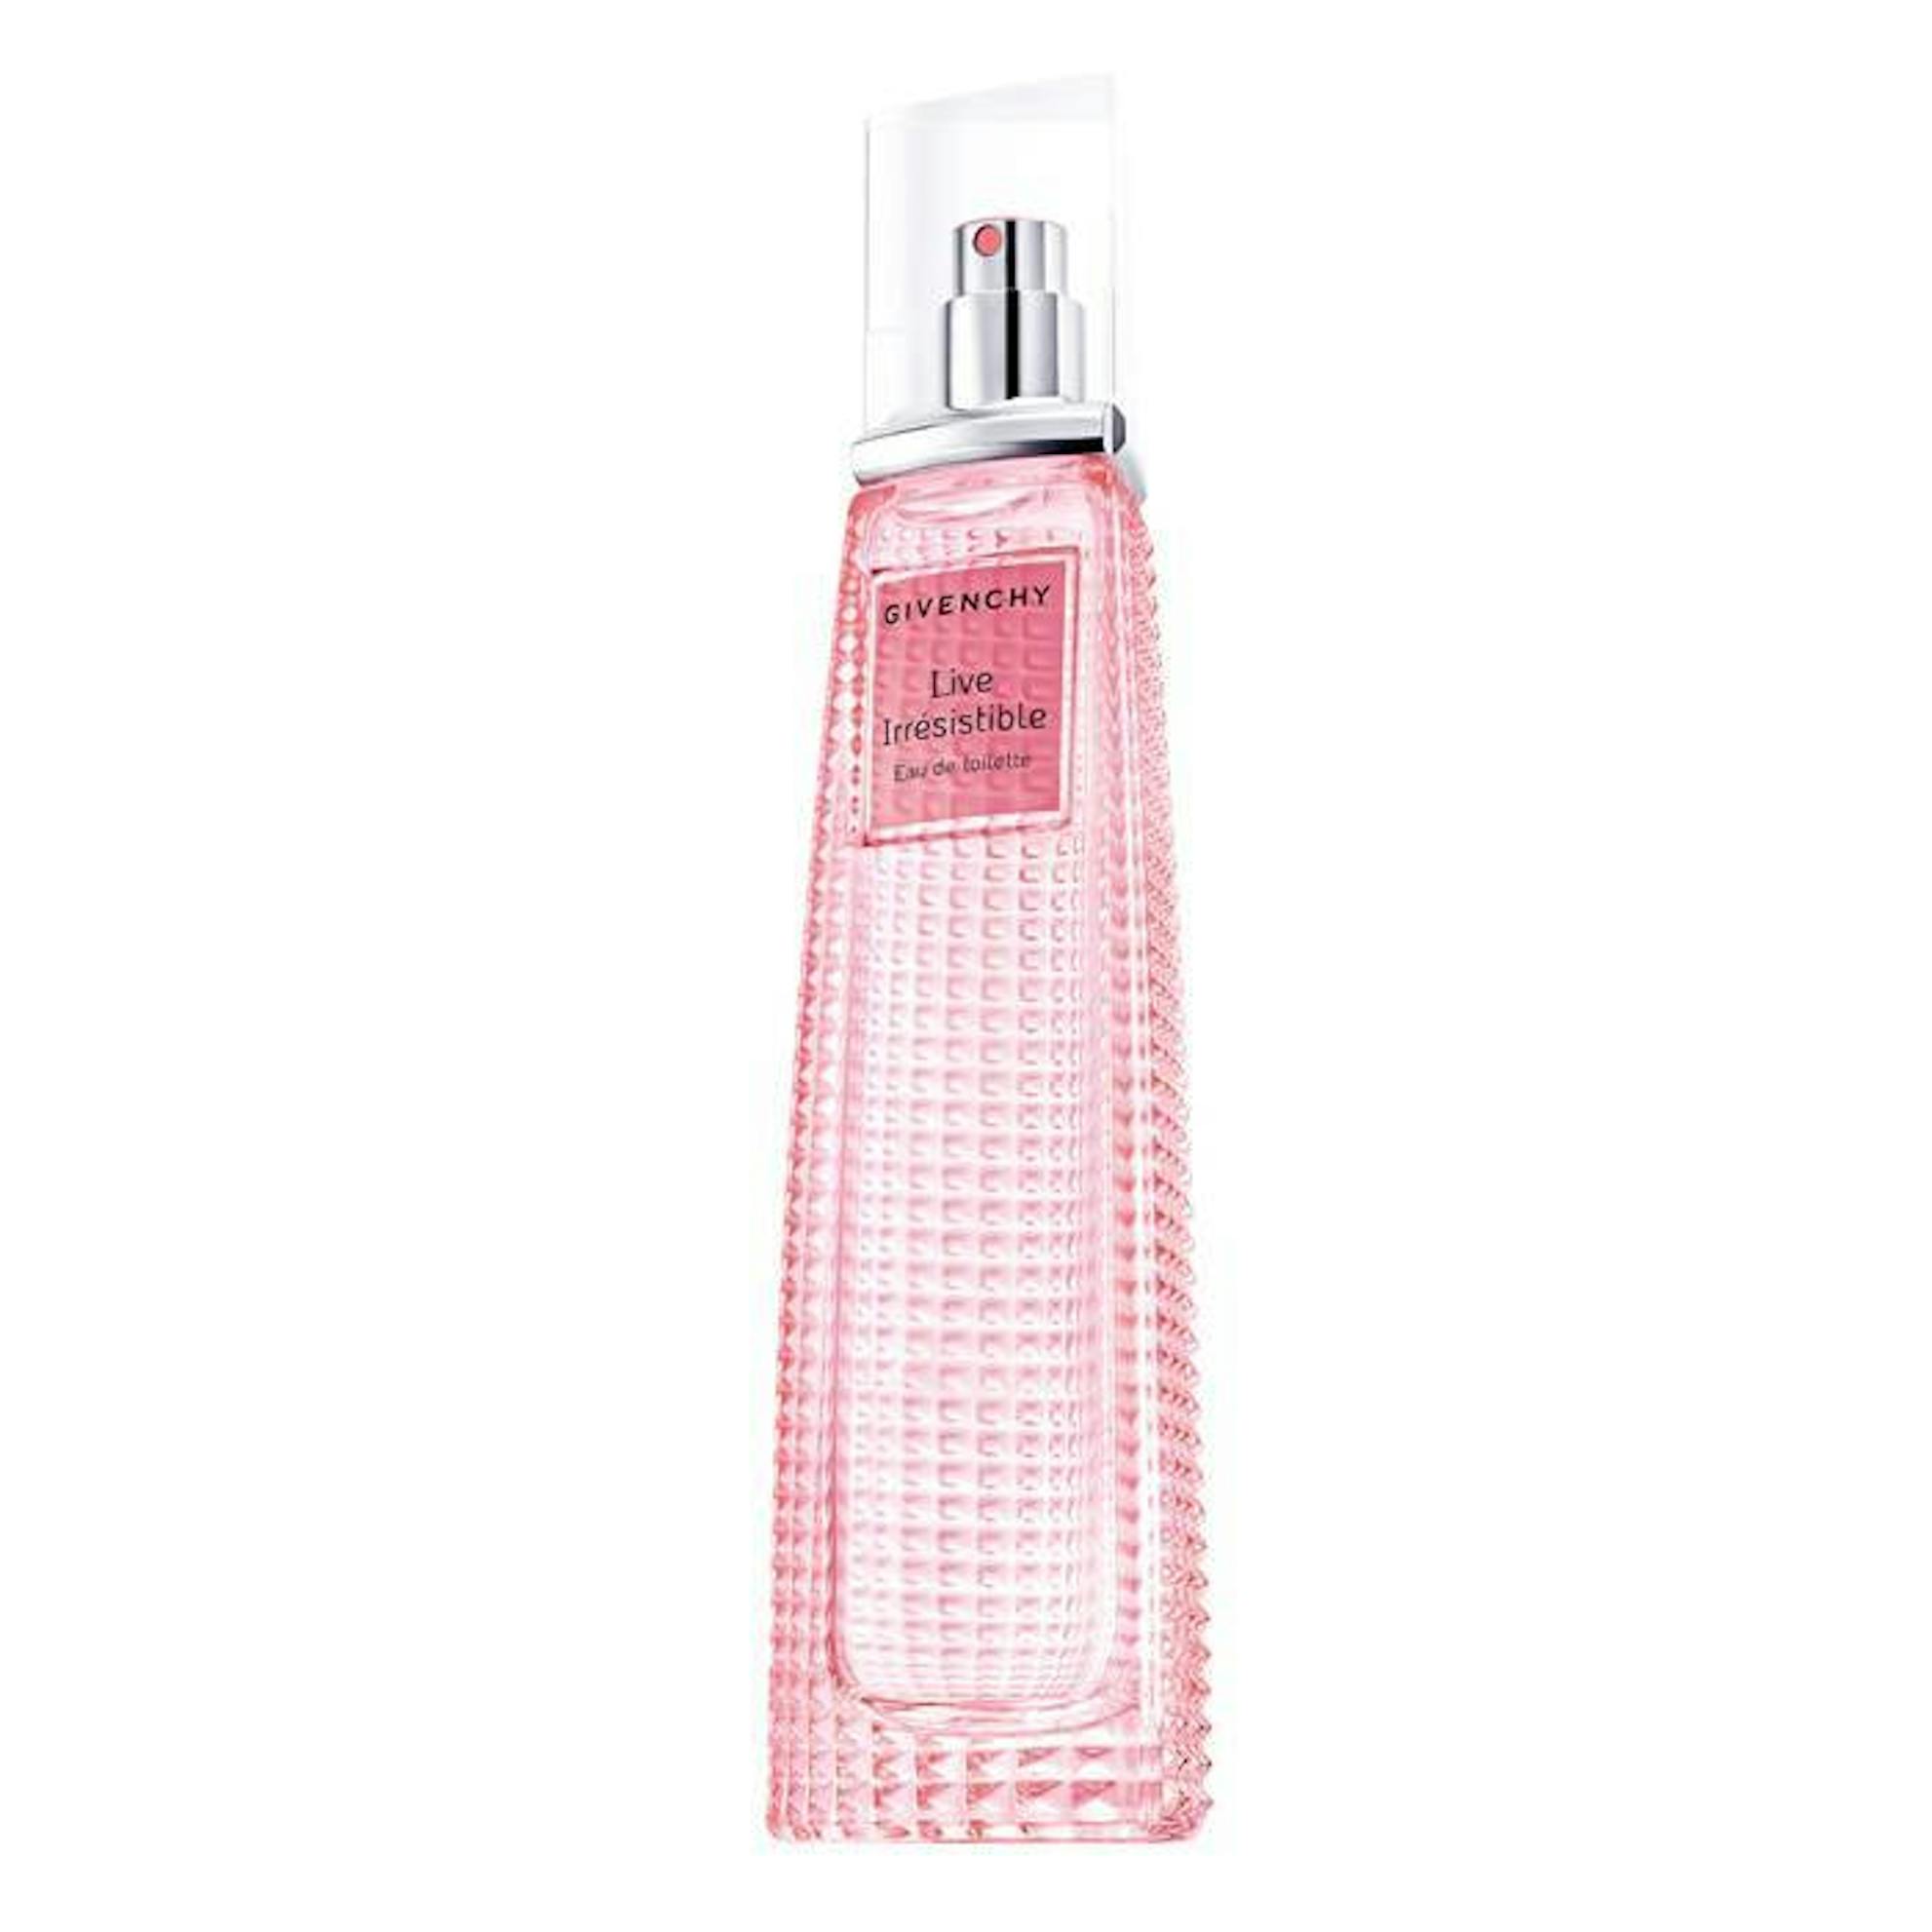 Shop Givenchy Live Irresistible Eau De Toilette 75ml Perfume for Women  online at The Fragrance Shop. Free delivery available. Free click &  collect. | The Fragrance Shop